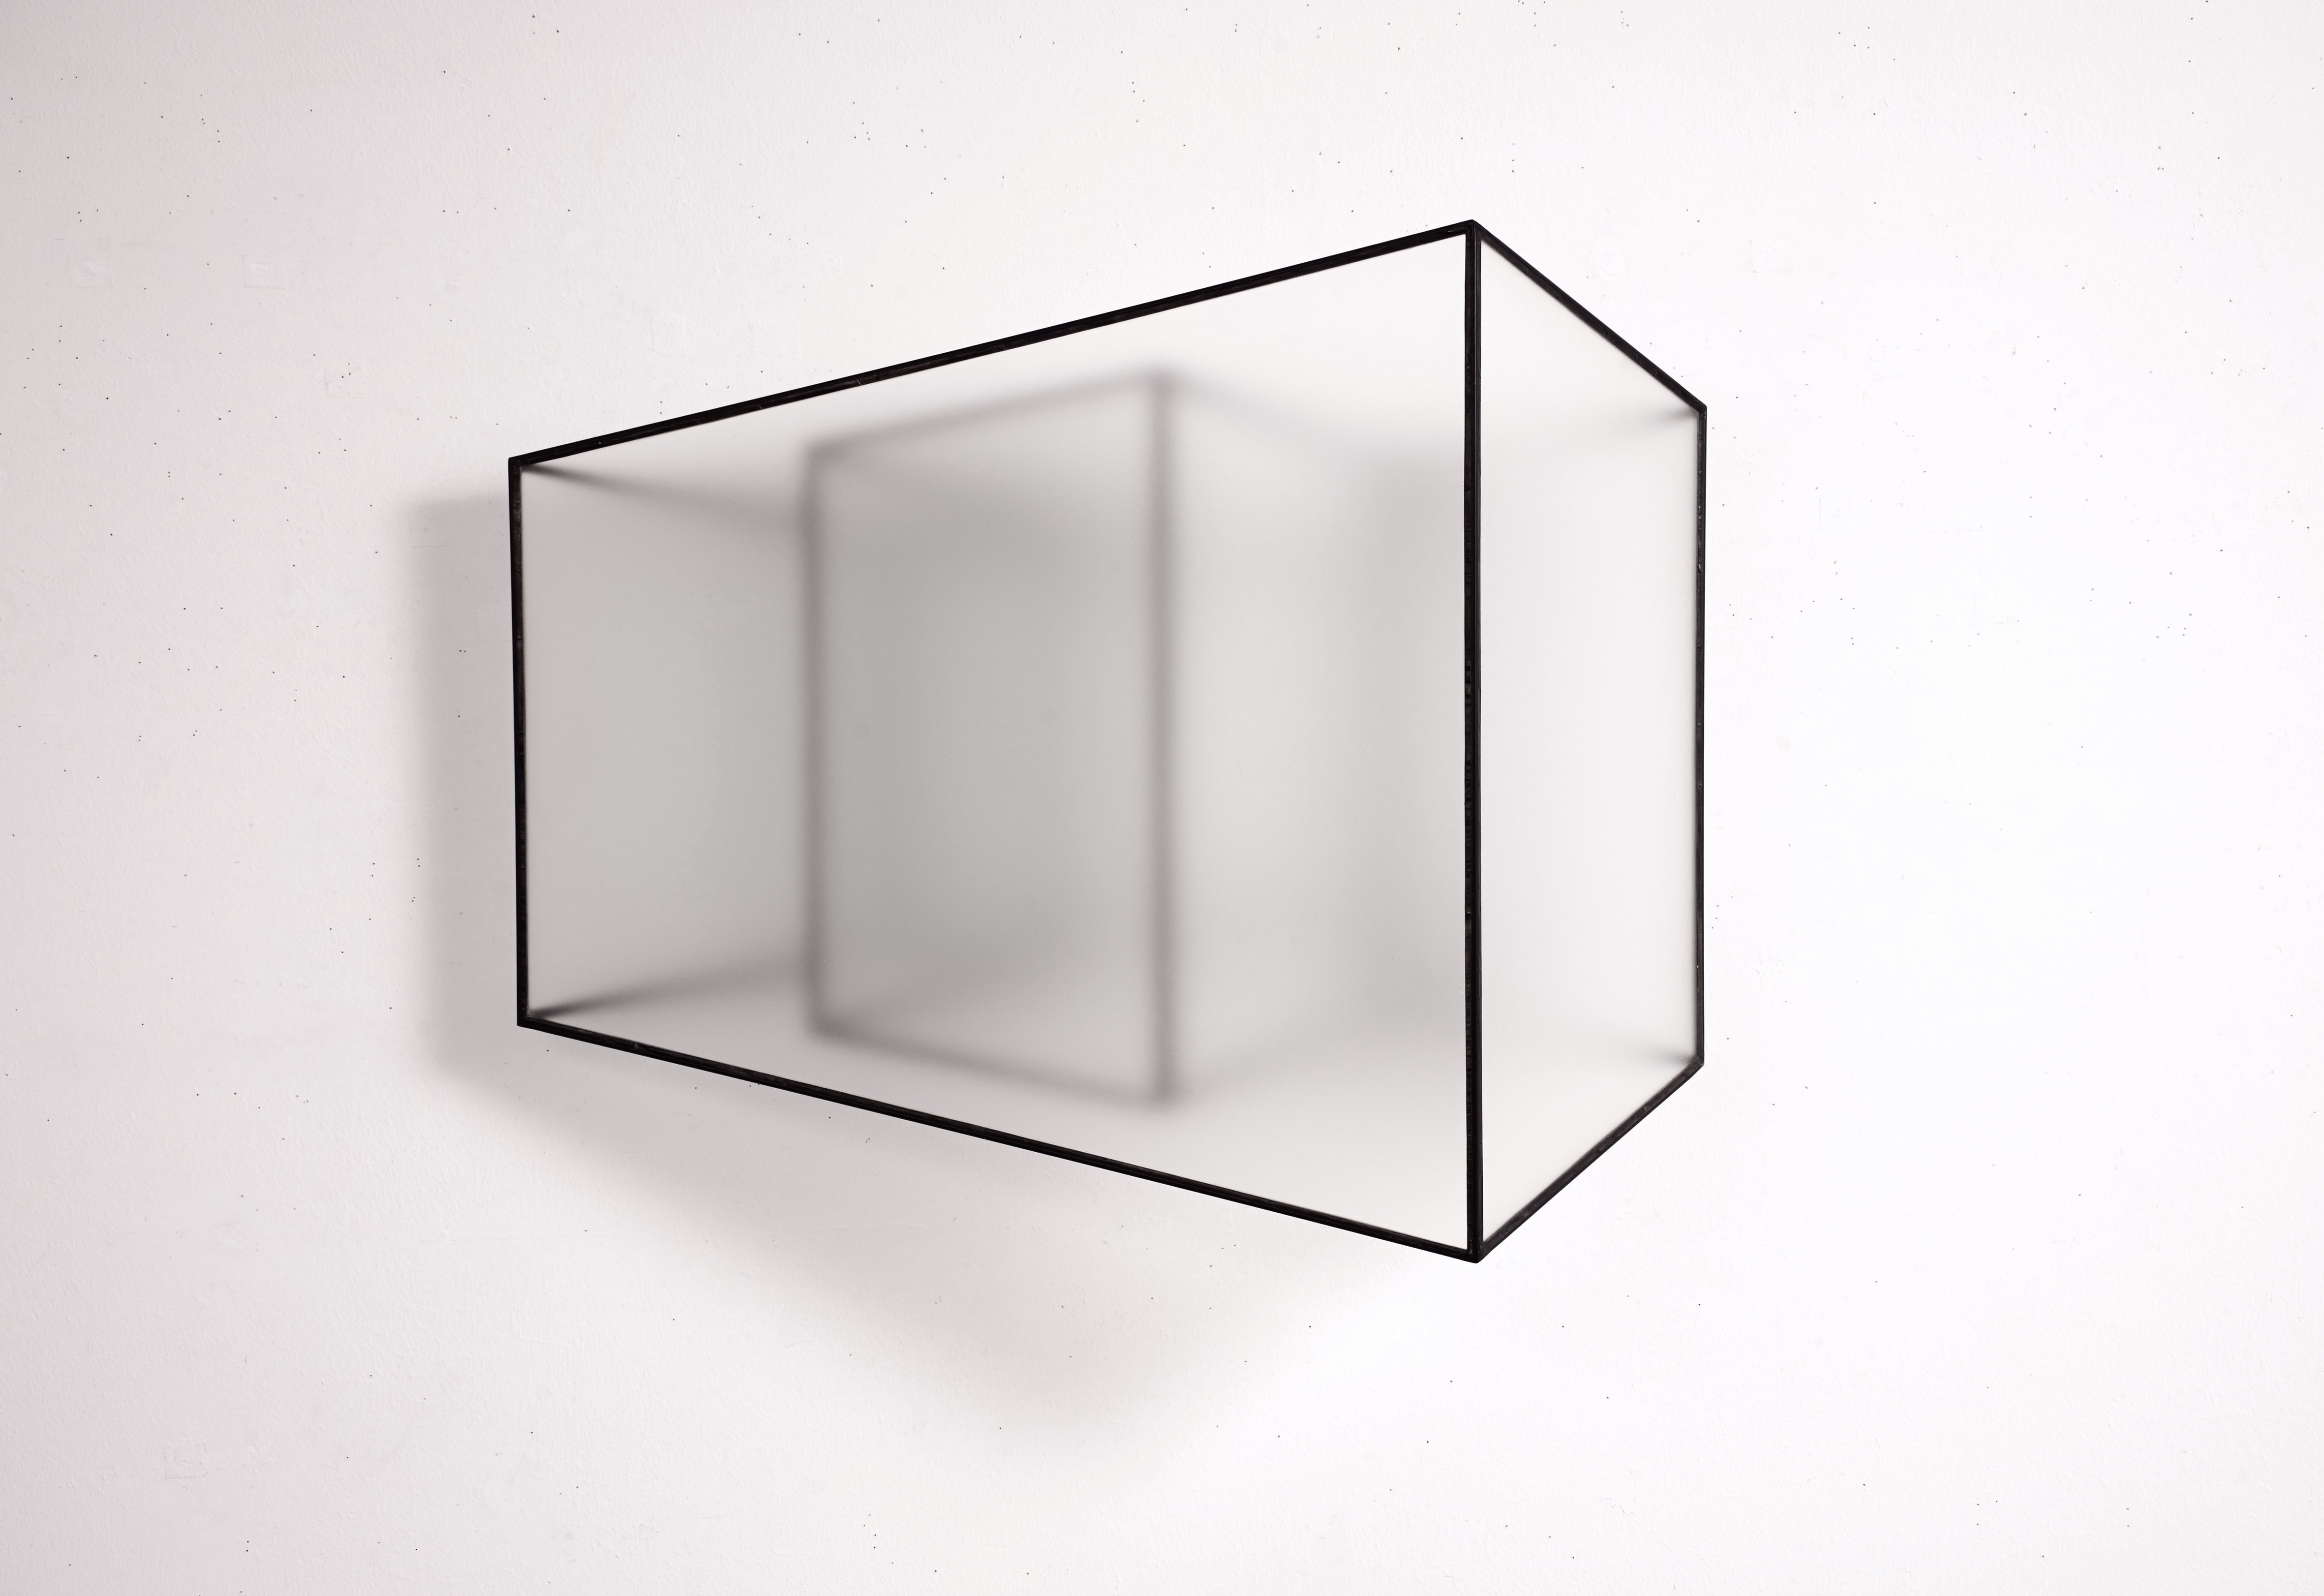 Reinoud Oudshoorn - Untitled, Frosted glass and iron, 60 x 73 x 25 cm, 2015